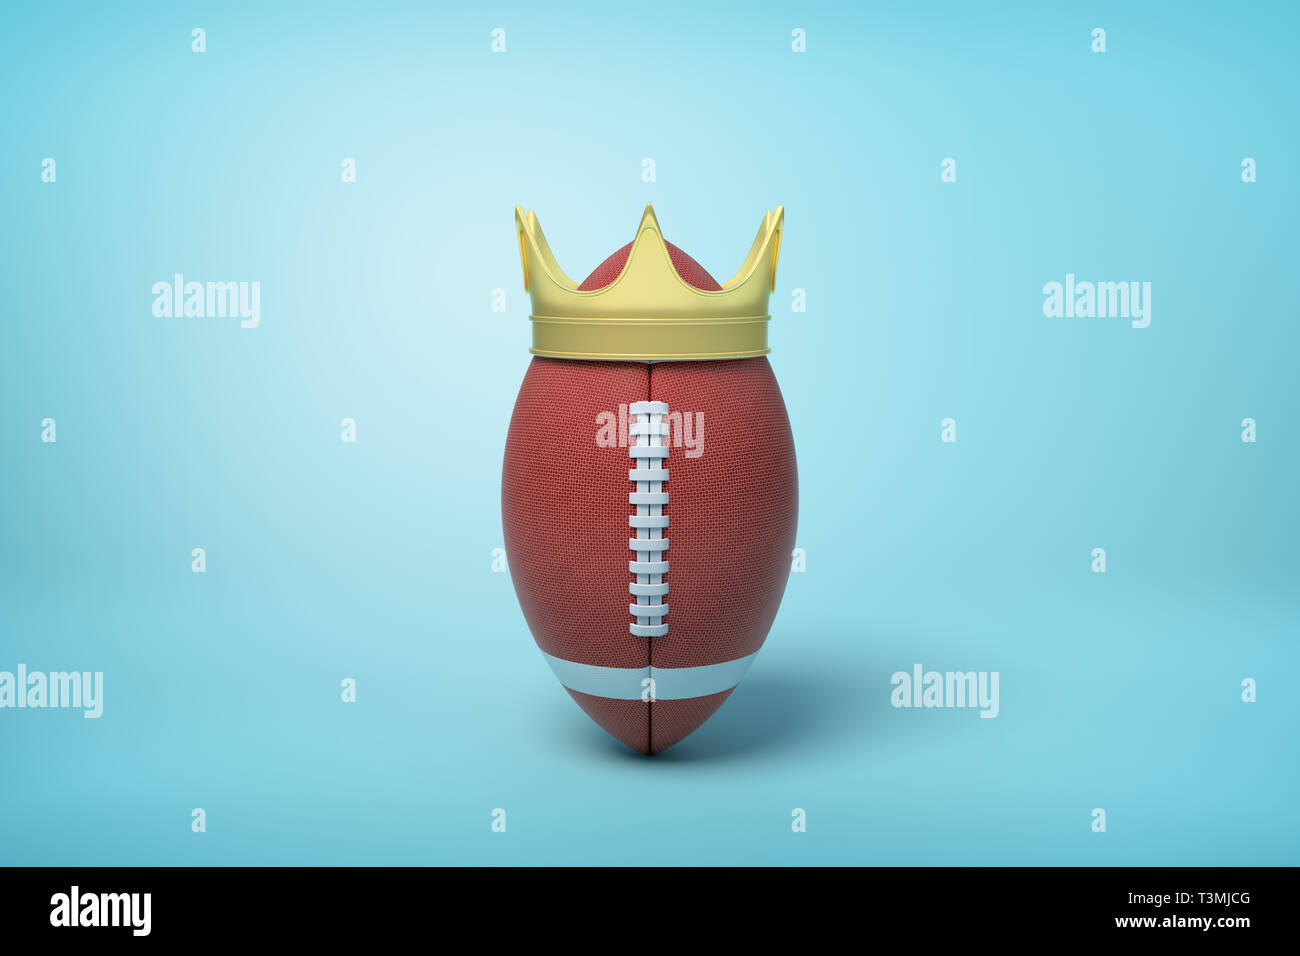 3d rendering of brown ball for American football standing upright and wearing golden crown on light blue background. Stock Photo